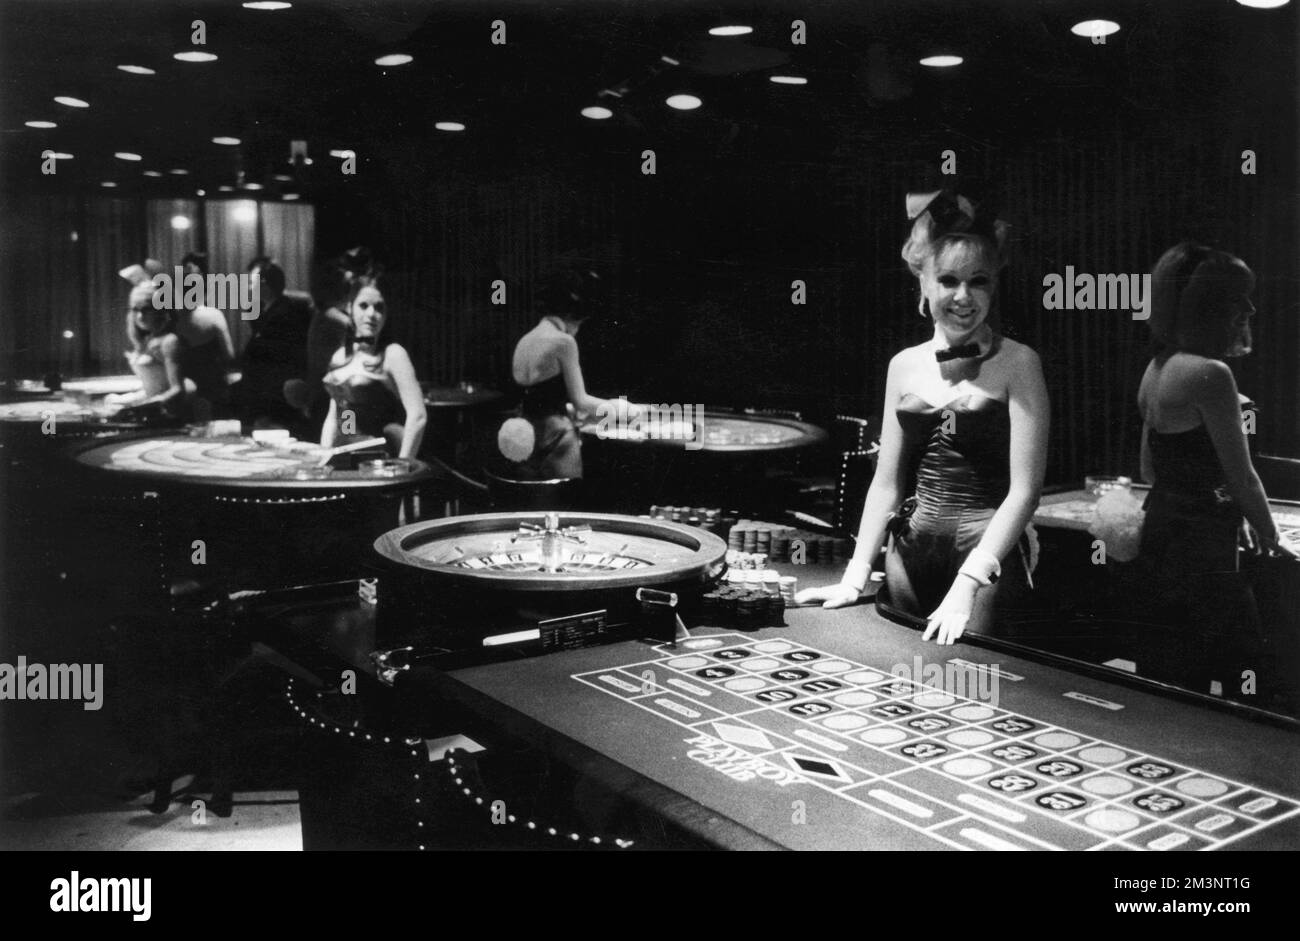 Bunny girls operate gaming tables at the Playboy Club in London which opened in 1966.      Date: 1969 Stock Photo